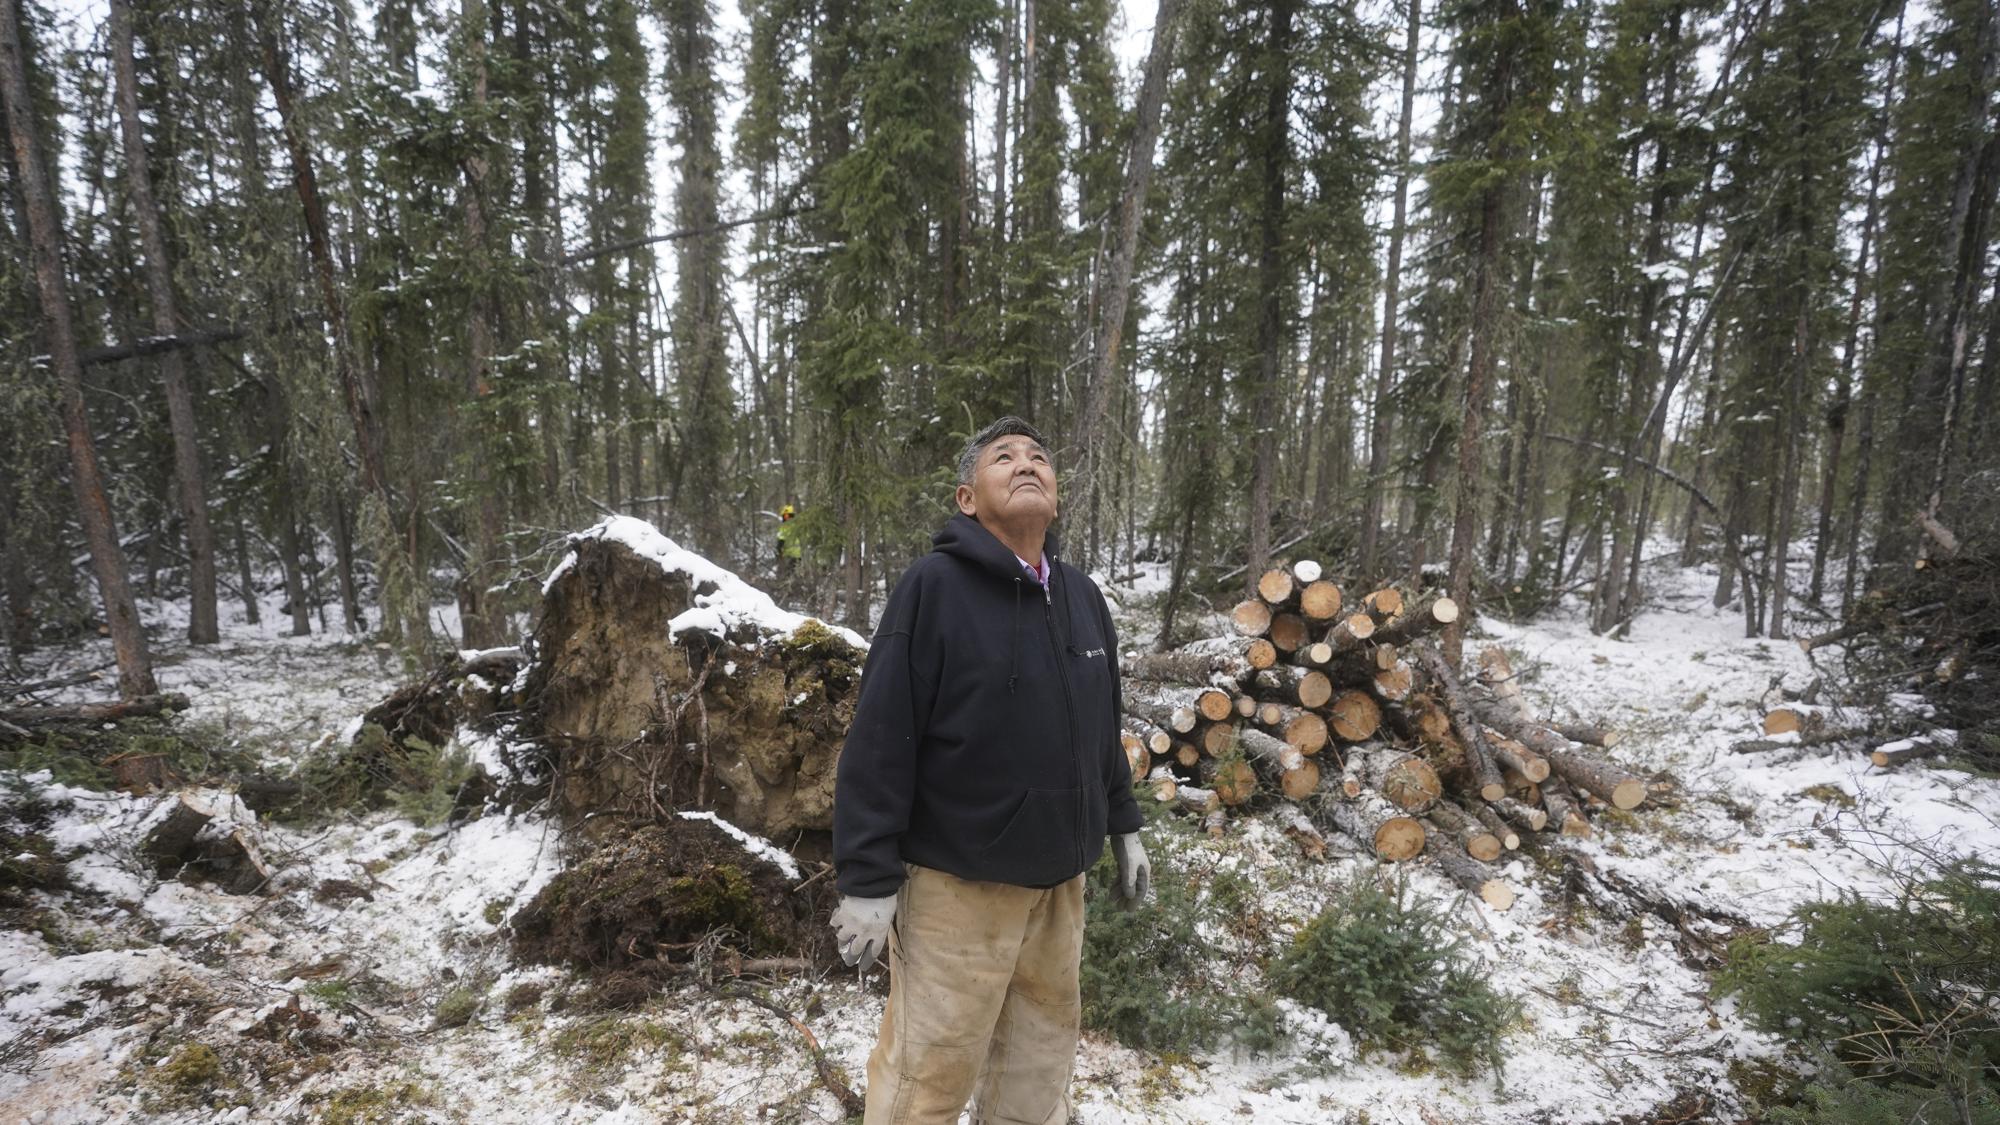 Alfred Jonathan looks at the trees Thursday, Sept. 23, 2021, in Tanacross, Alaska."If somebody gets sick around there, there's no place to take them," said 78-year-old Alfred Jonathan. He tells people that COVID is here."This one is pretty scary," said Jonathan, who encouraged people to get vaccinated if for nothing else, for the sake of their children and grandchildren. "And the other people that didn't get vaccinated?" he said. "Gosh, we're afraid for them."(AP Photo/Rick Bowmer)